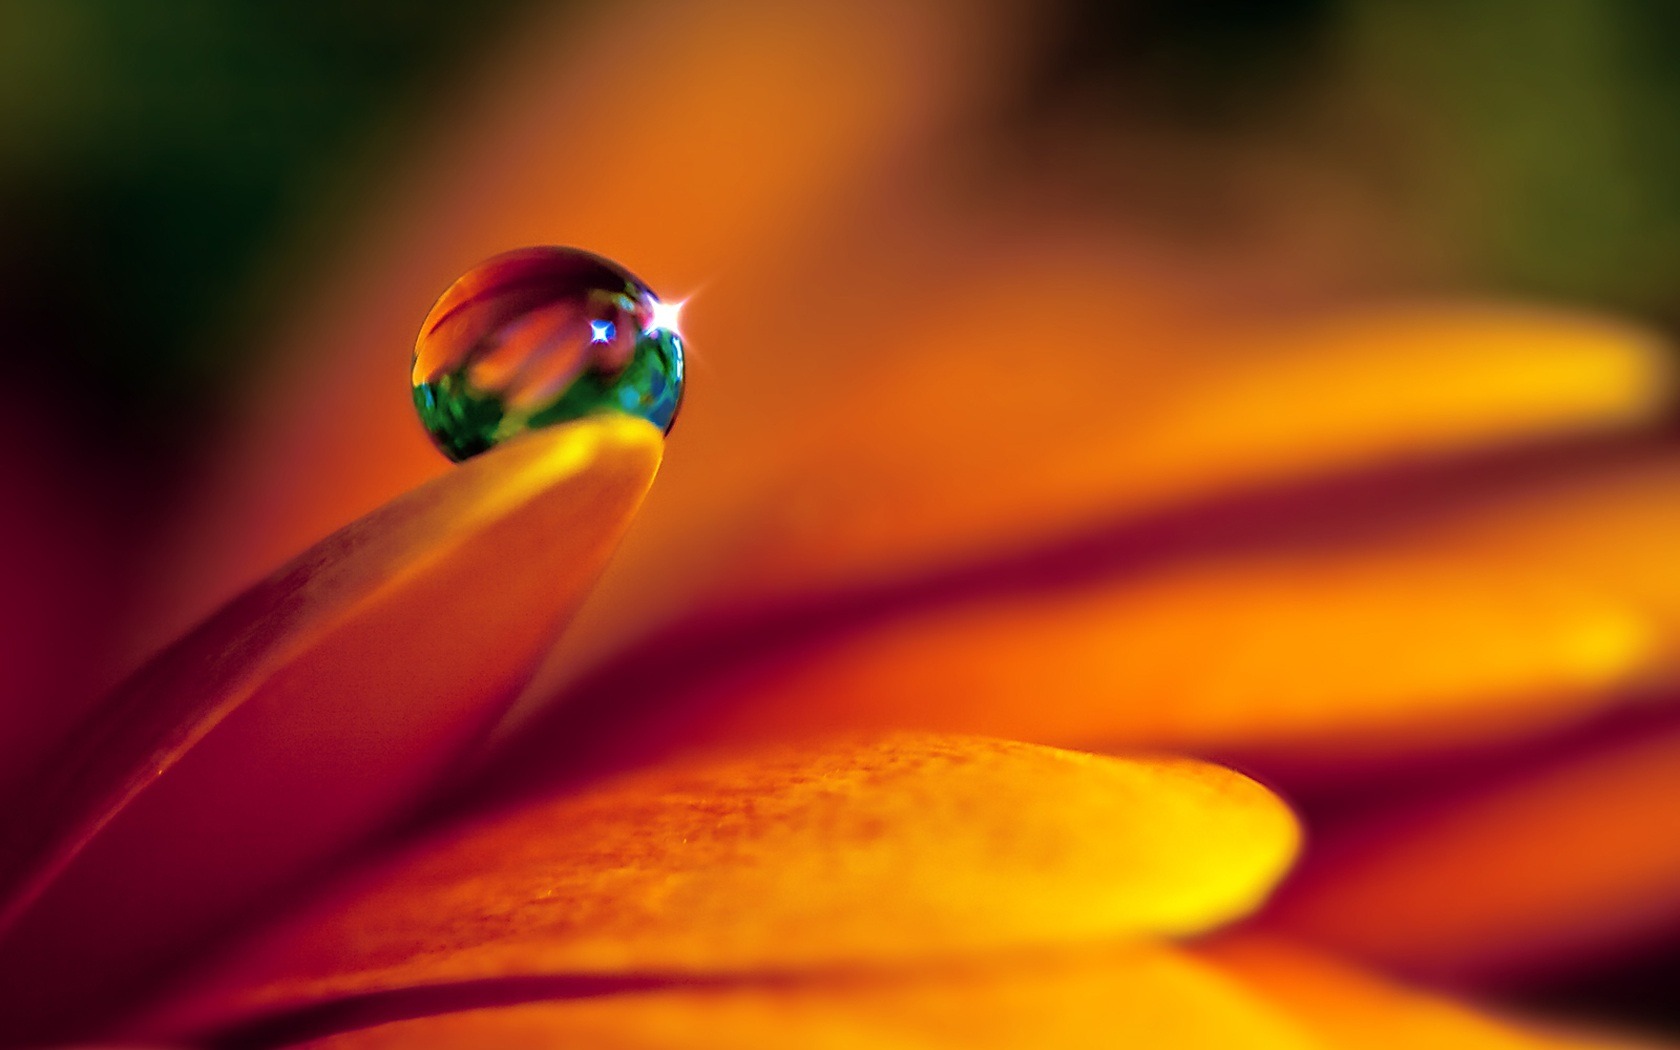 HD wallpaper flowers and drops of water #1 - 1680x1050